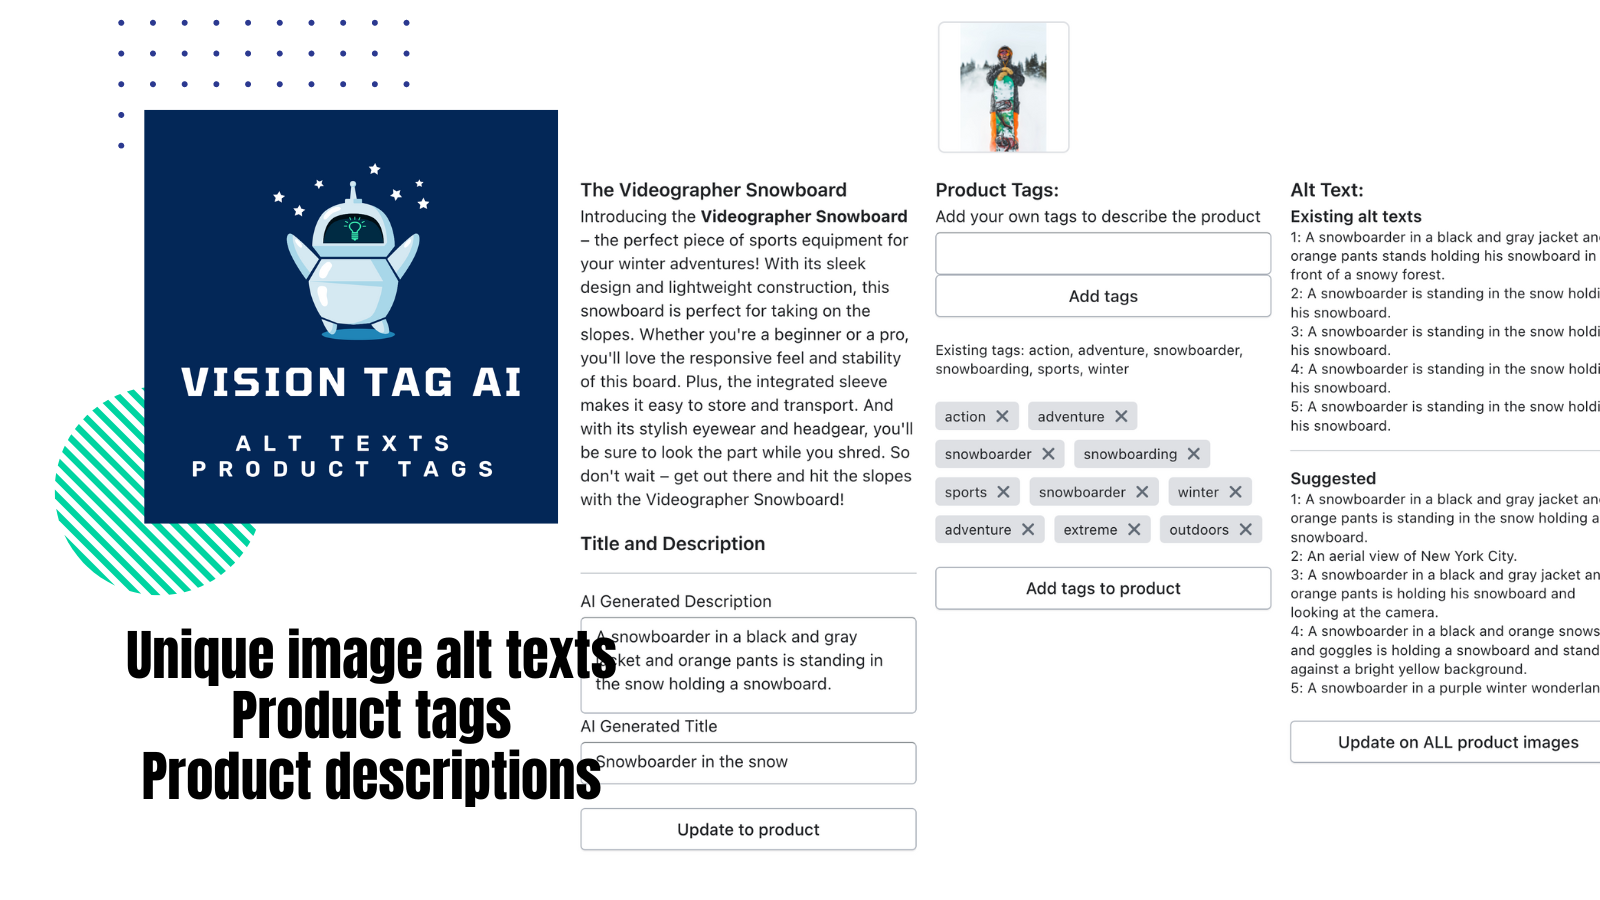 VisionTag AI for Alt Texts, Product Tags and Descriptions